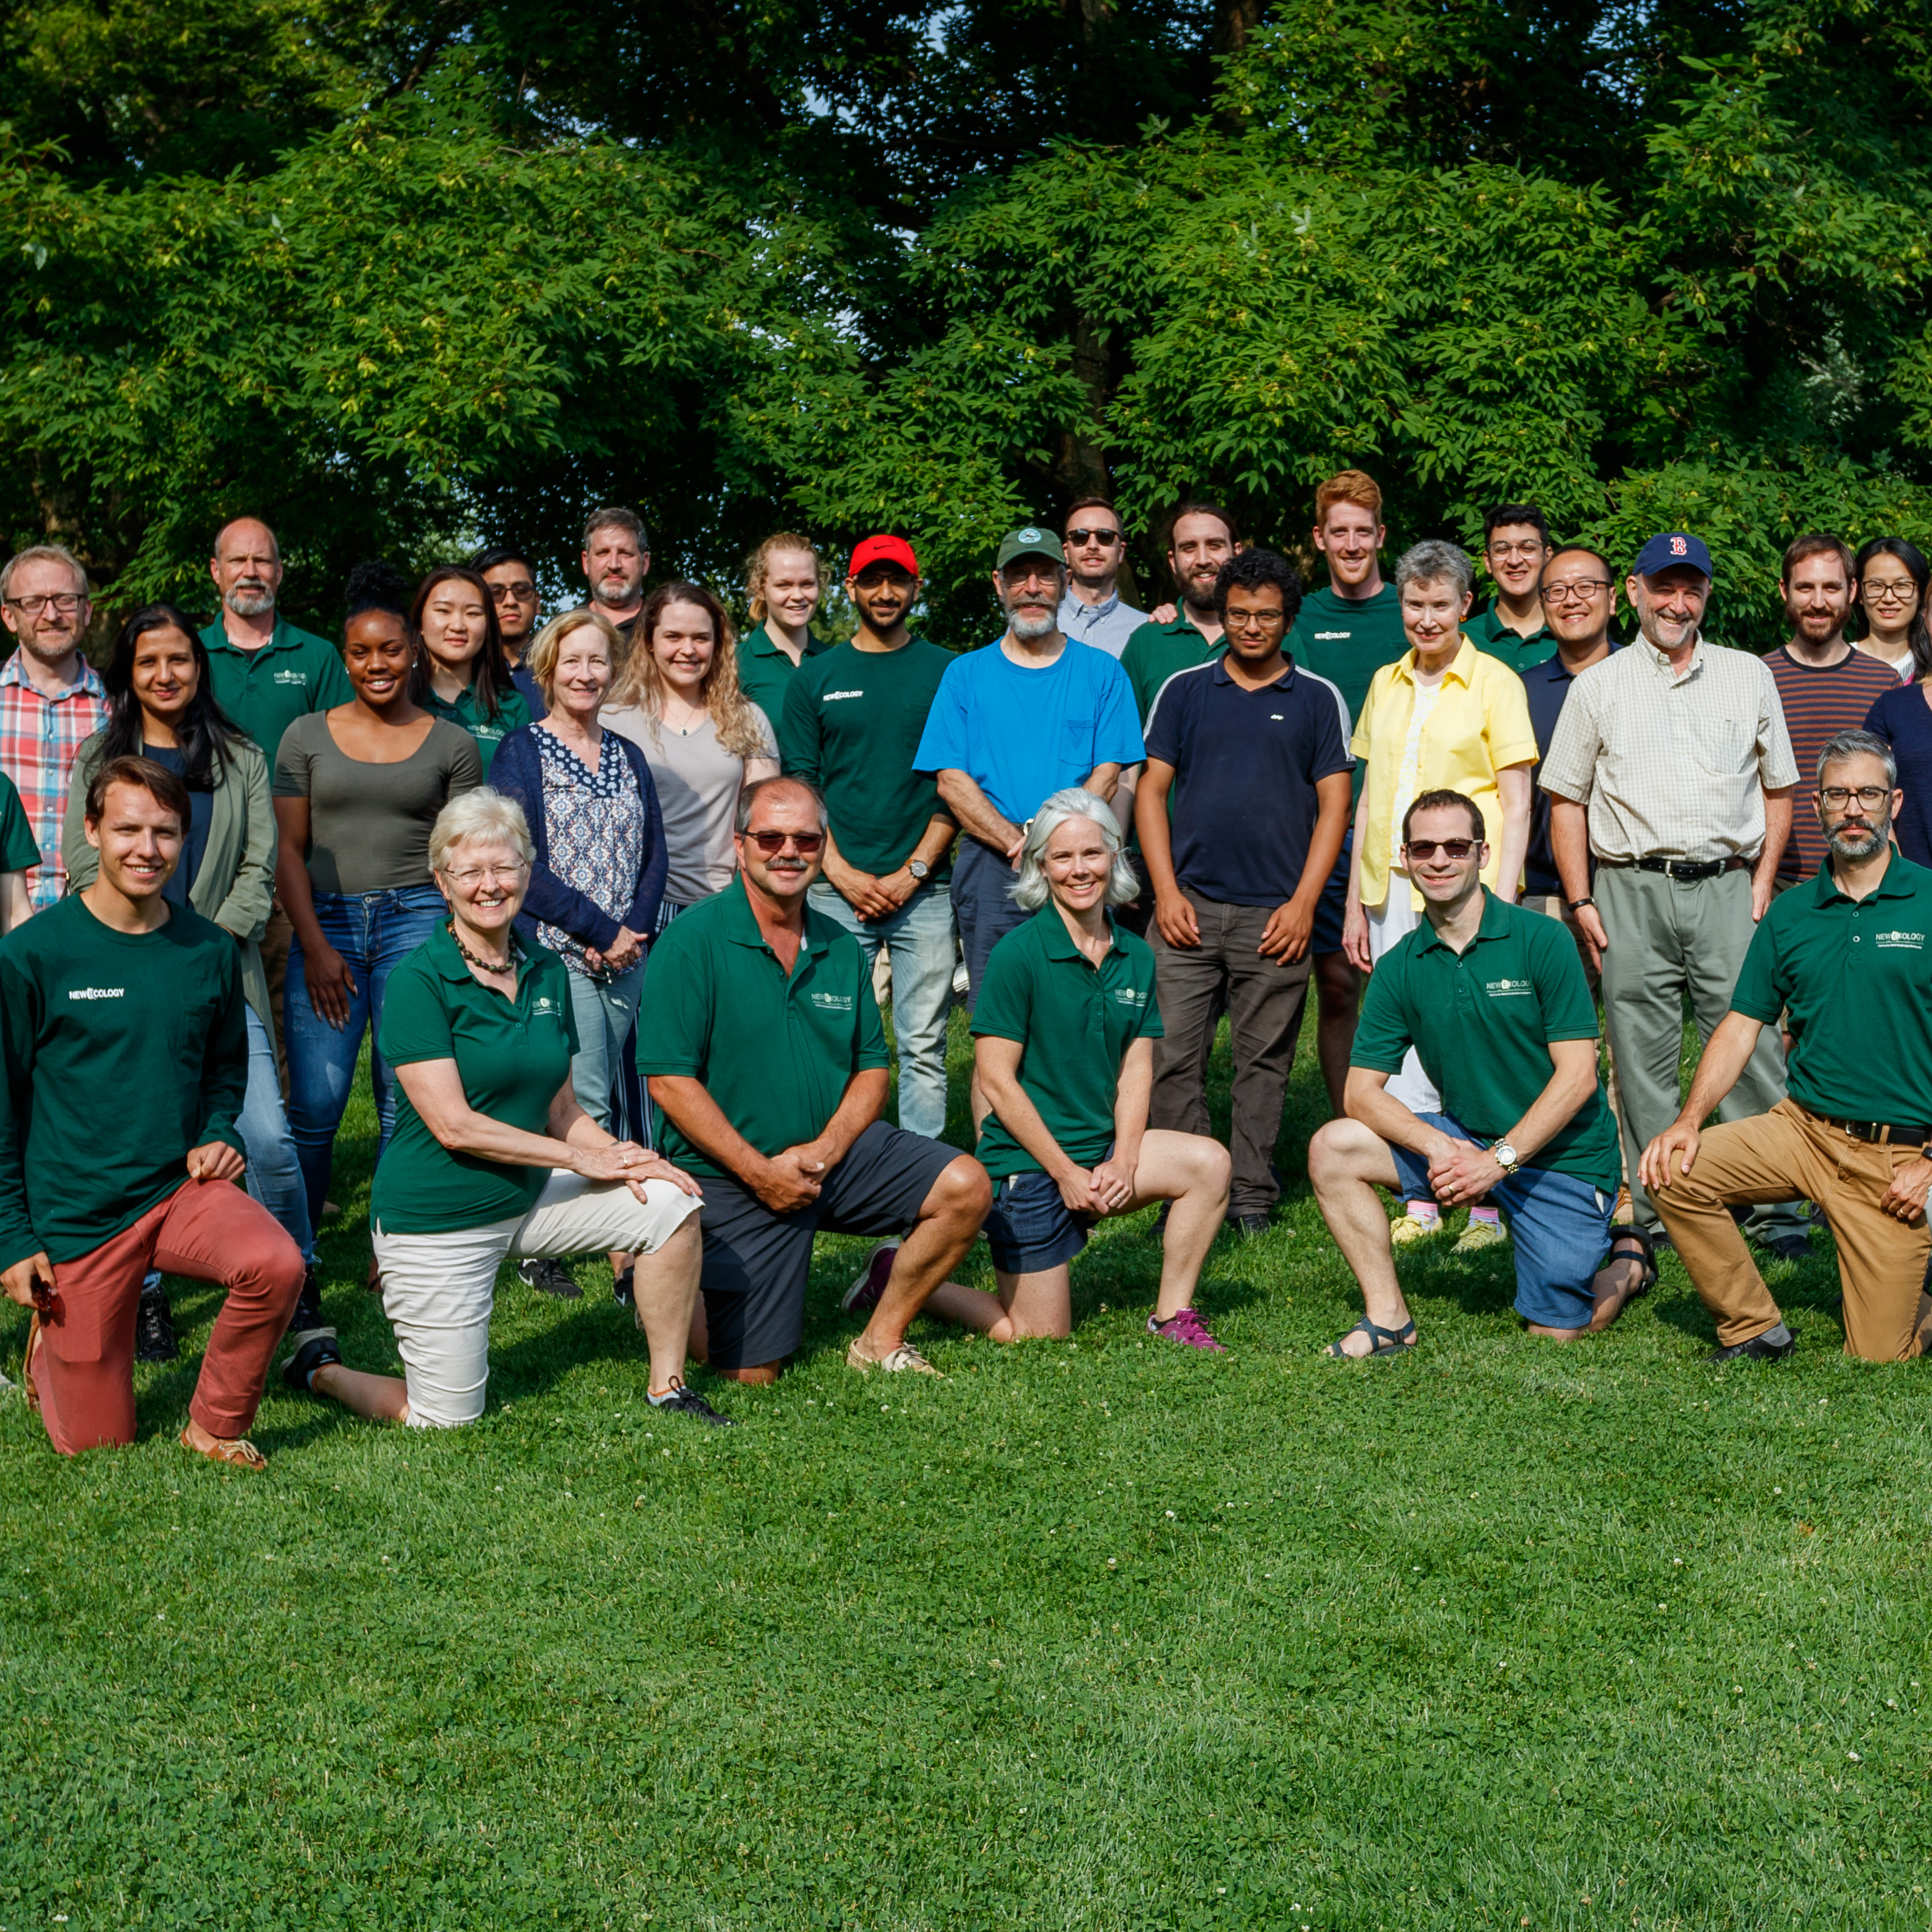 group photo of New Ecology employees outside on green grass